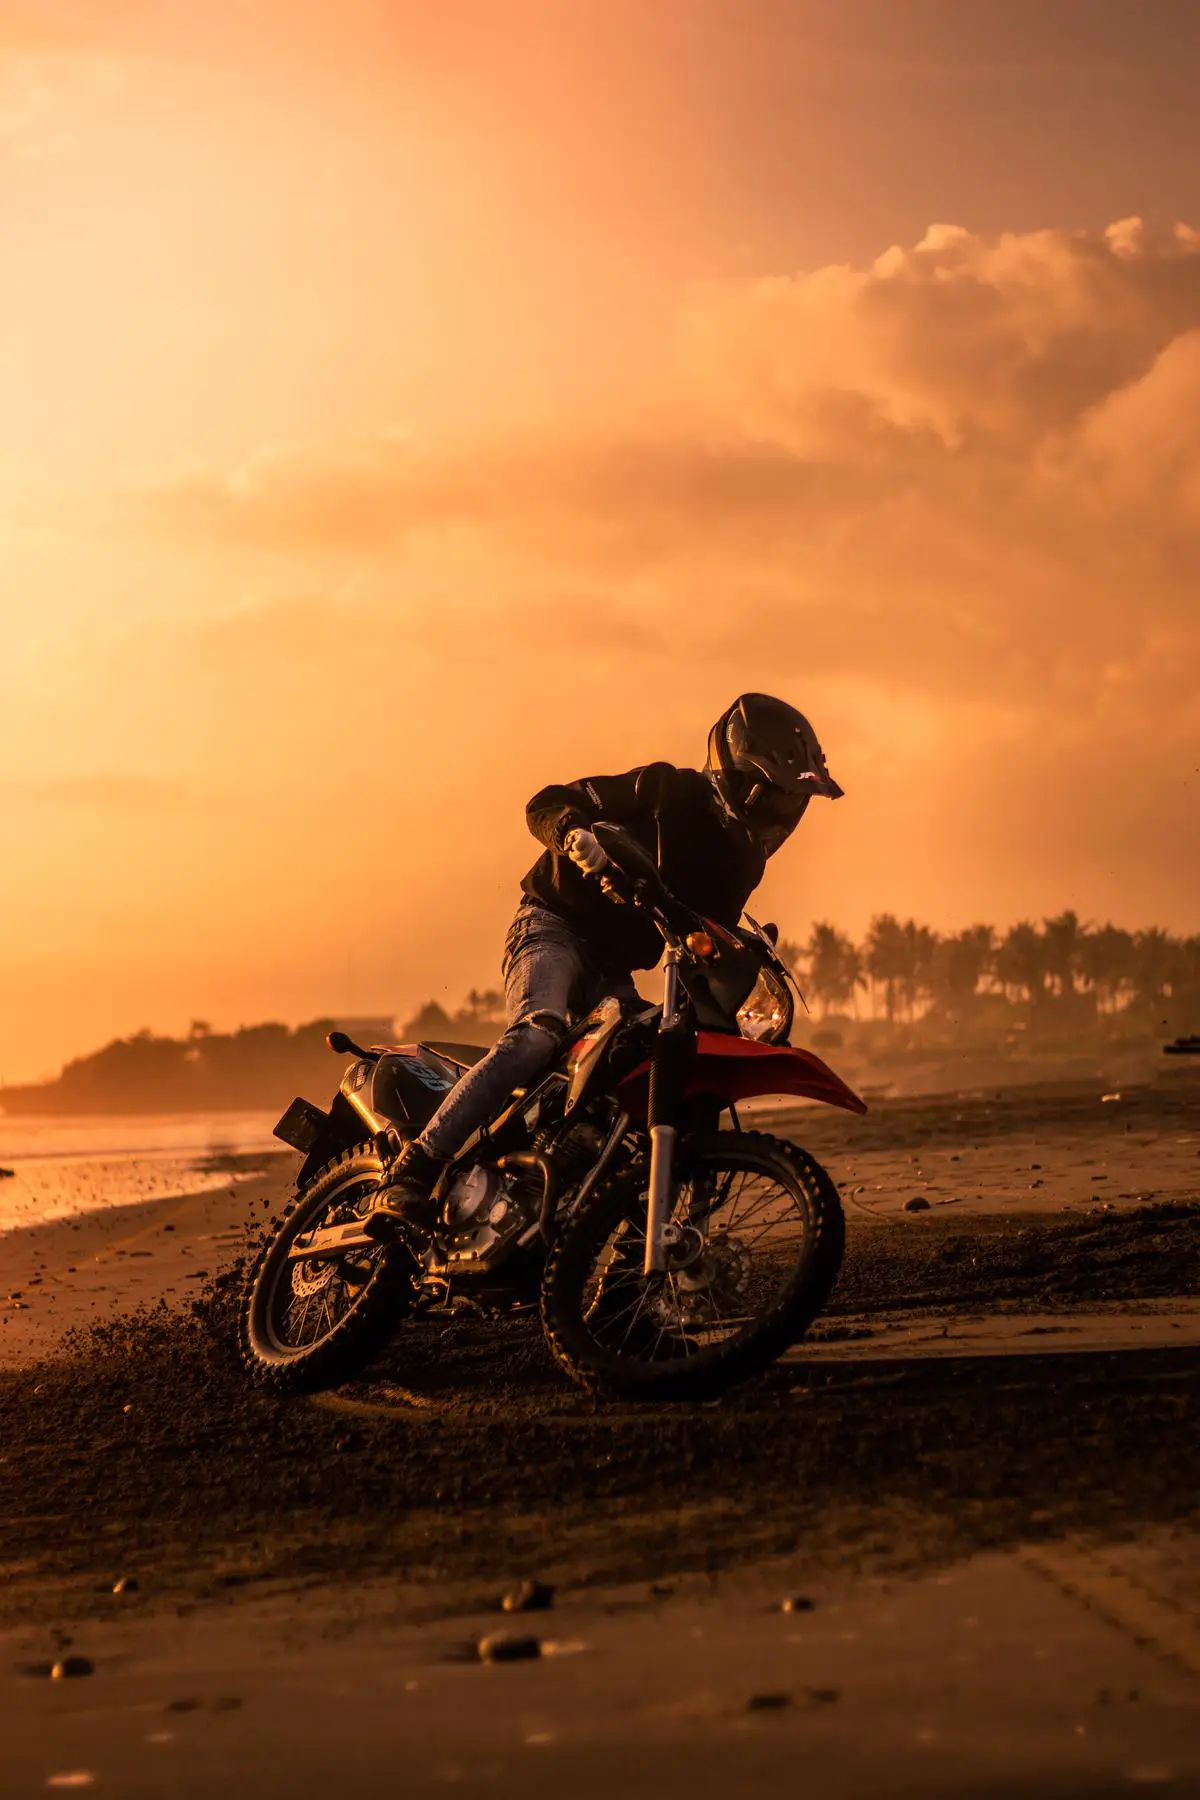 A serene image of a rider on an e-bike cruising along a beach with the sun setting in the background.